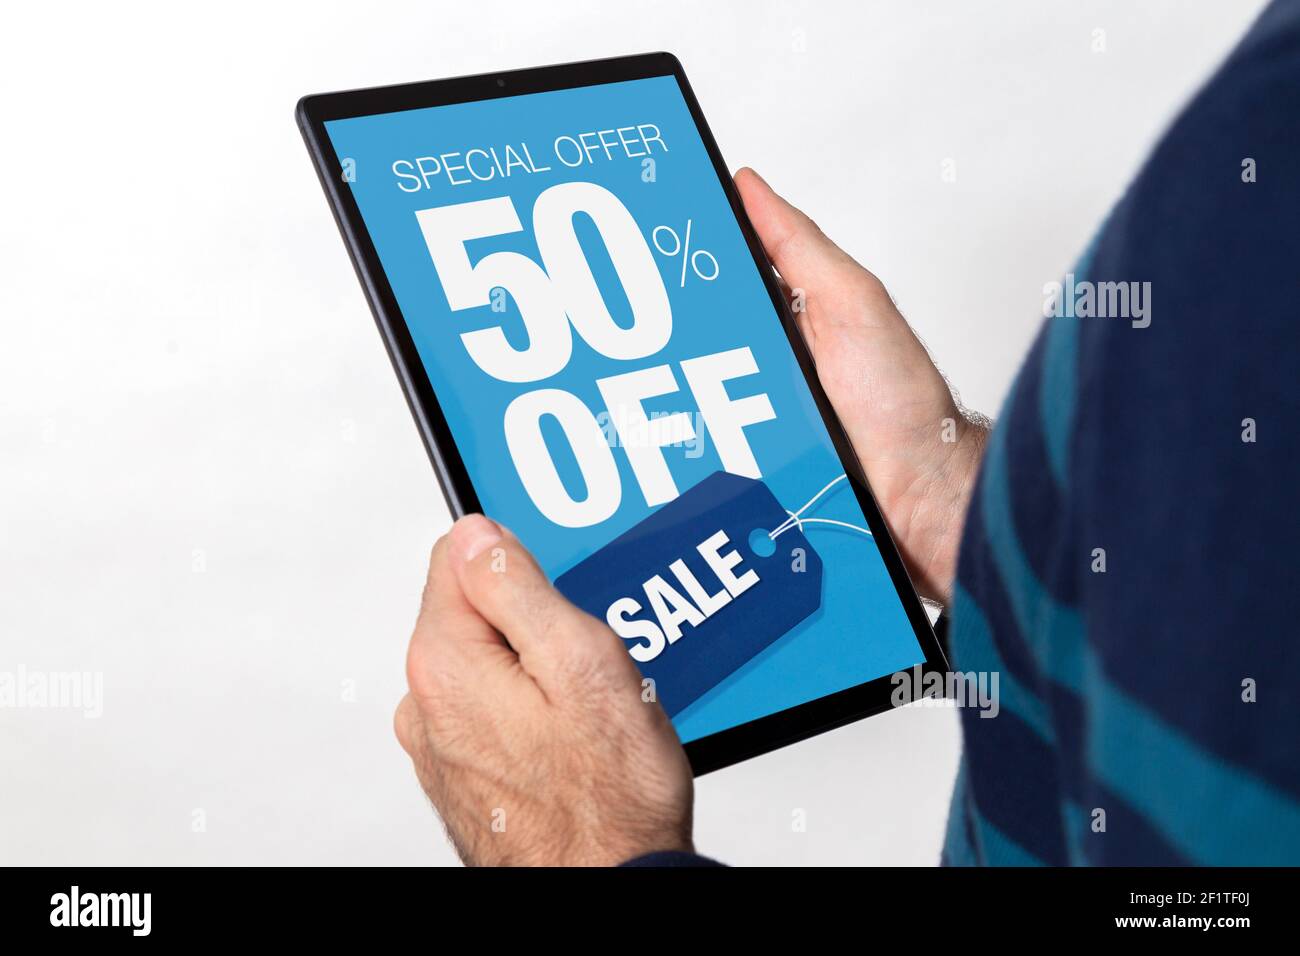 Man holding a tablet with 50% off sale adversiting on the screen. White background. Stock Photo